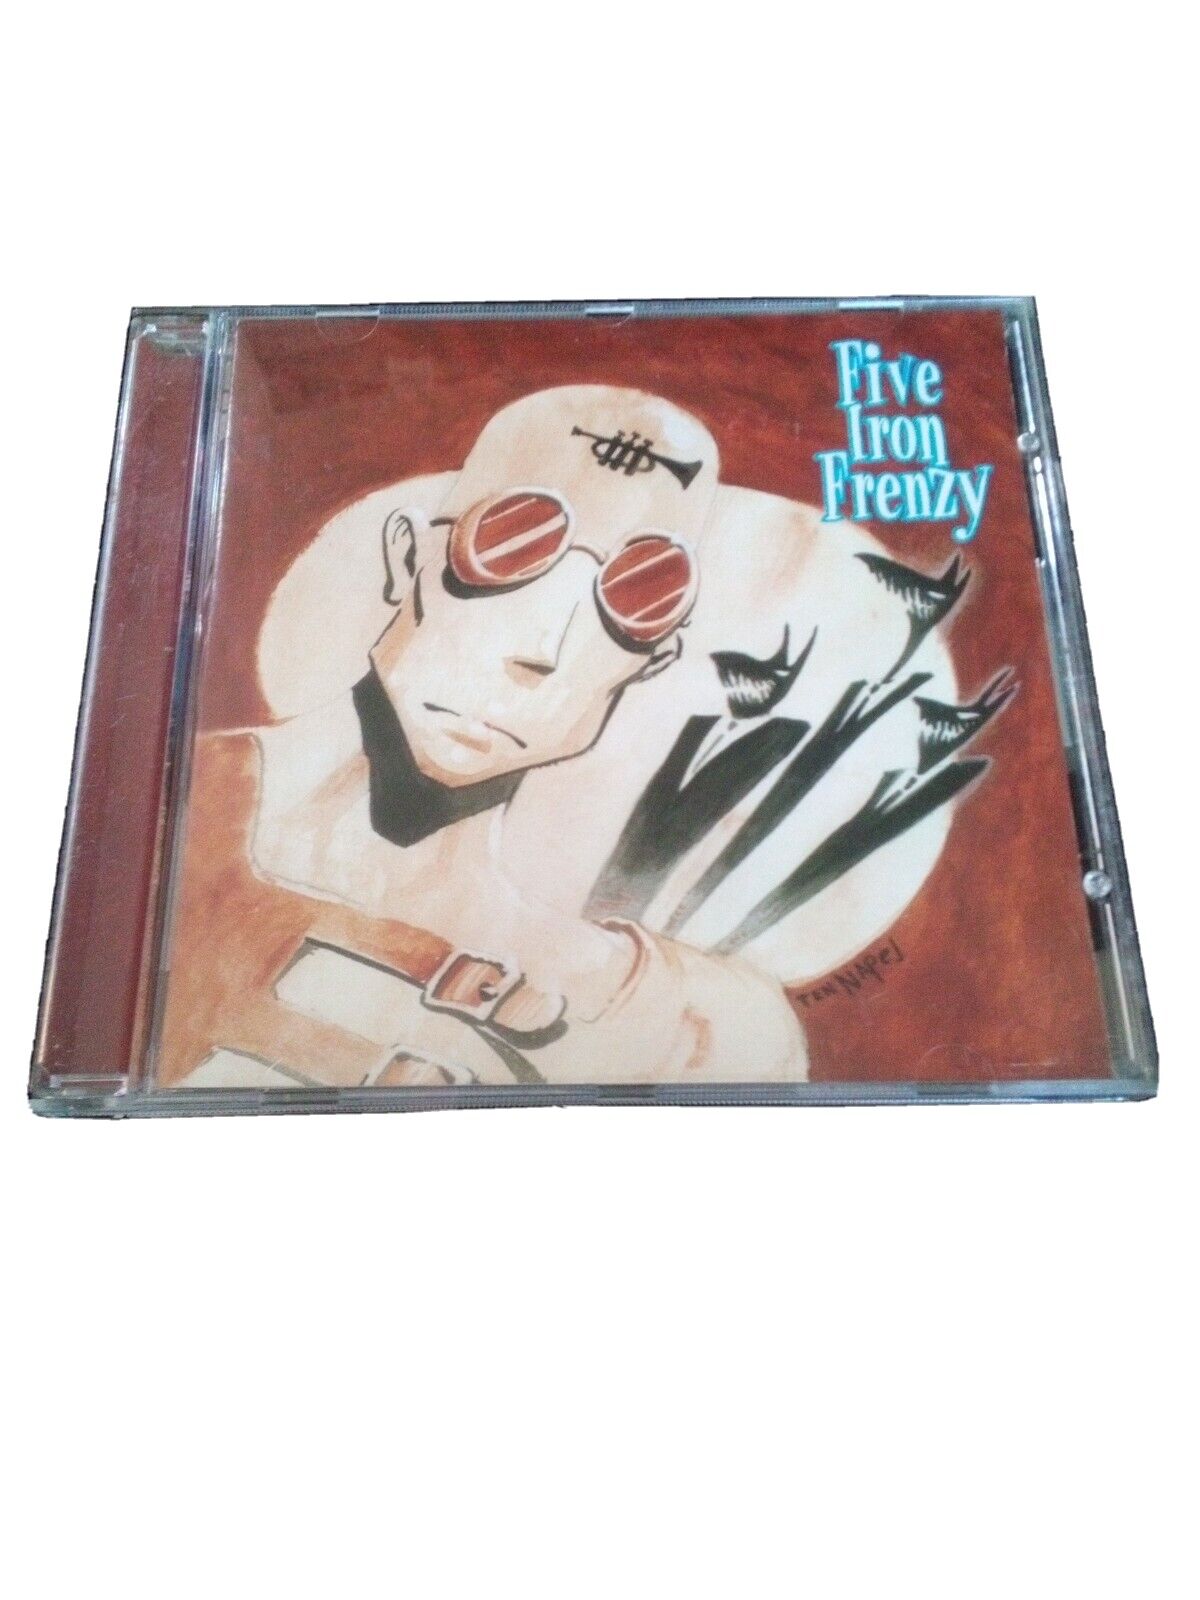 Our Newest Album Ever by Five Iron Frenzy (CD, Nov-1998, Five Minute Walk...